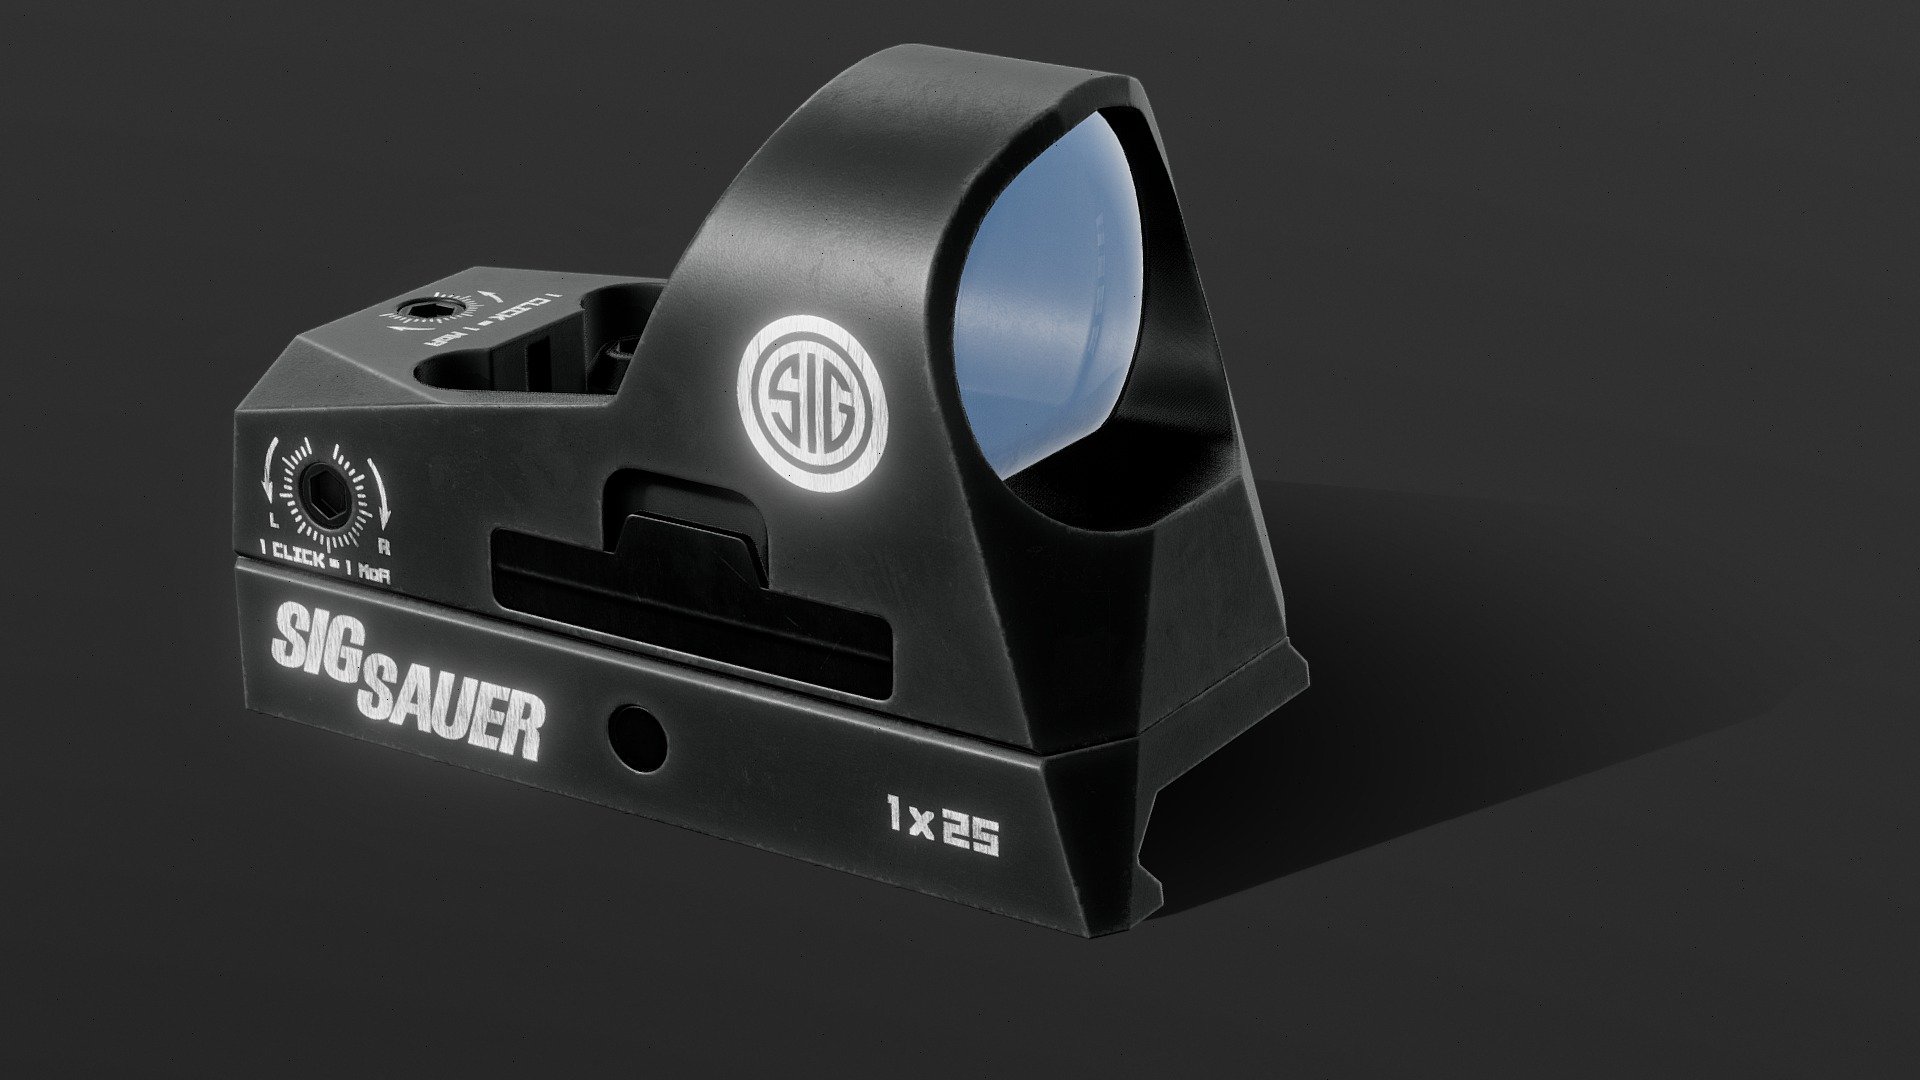 3D model of the Sig Sauer Romeo3 Red Dot Sight.

Made in Blender, Substance Painter, and Marmoset Toolbag.

I used 4K Textures for the scope, and 1K texture (roughness only) for the lens.

Polycount:5734

Vertex count:3047 - Sig Sauer Romeo3 Red Dot Sight - Buy Royalty Free 3D model by ferasabdallah 3d model